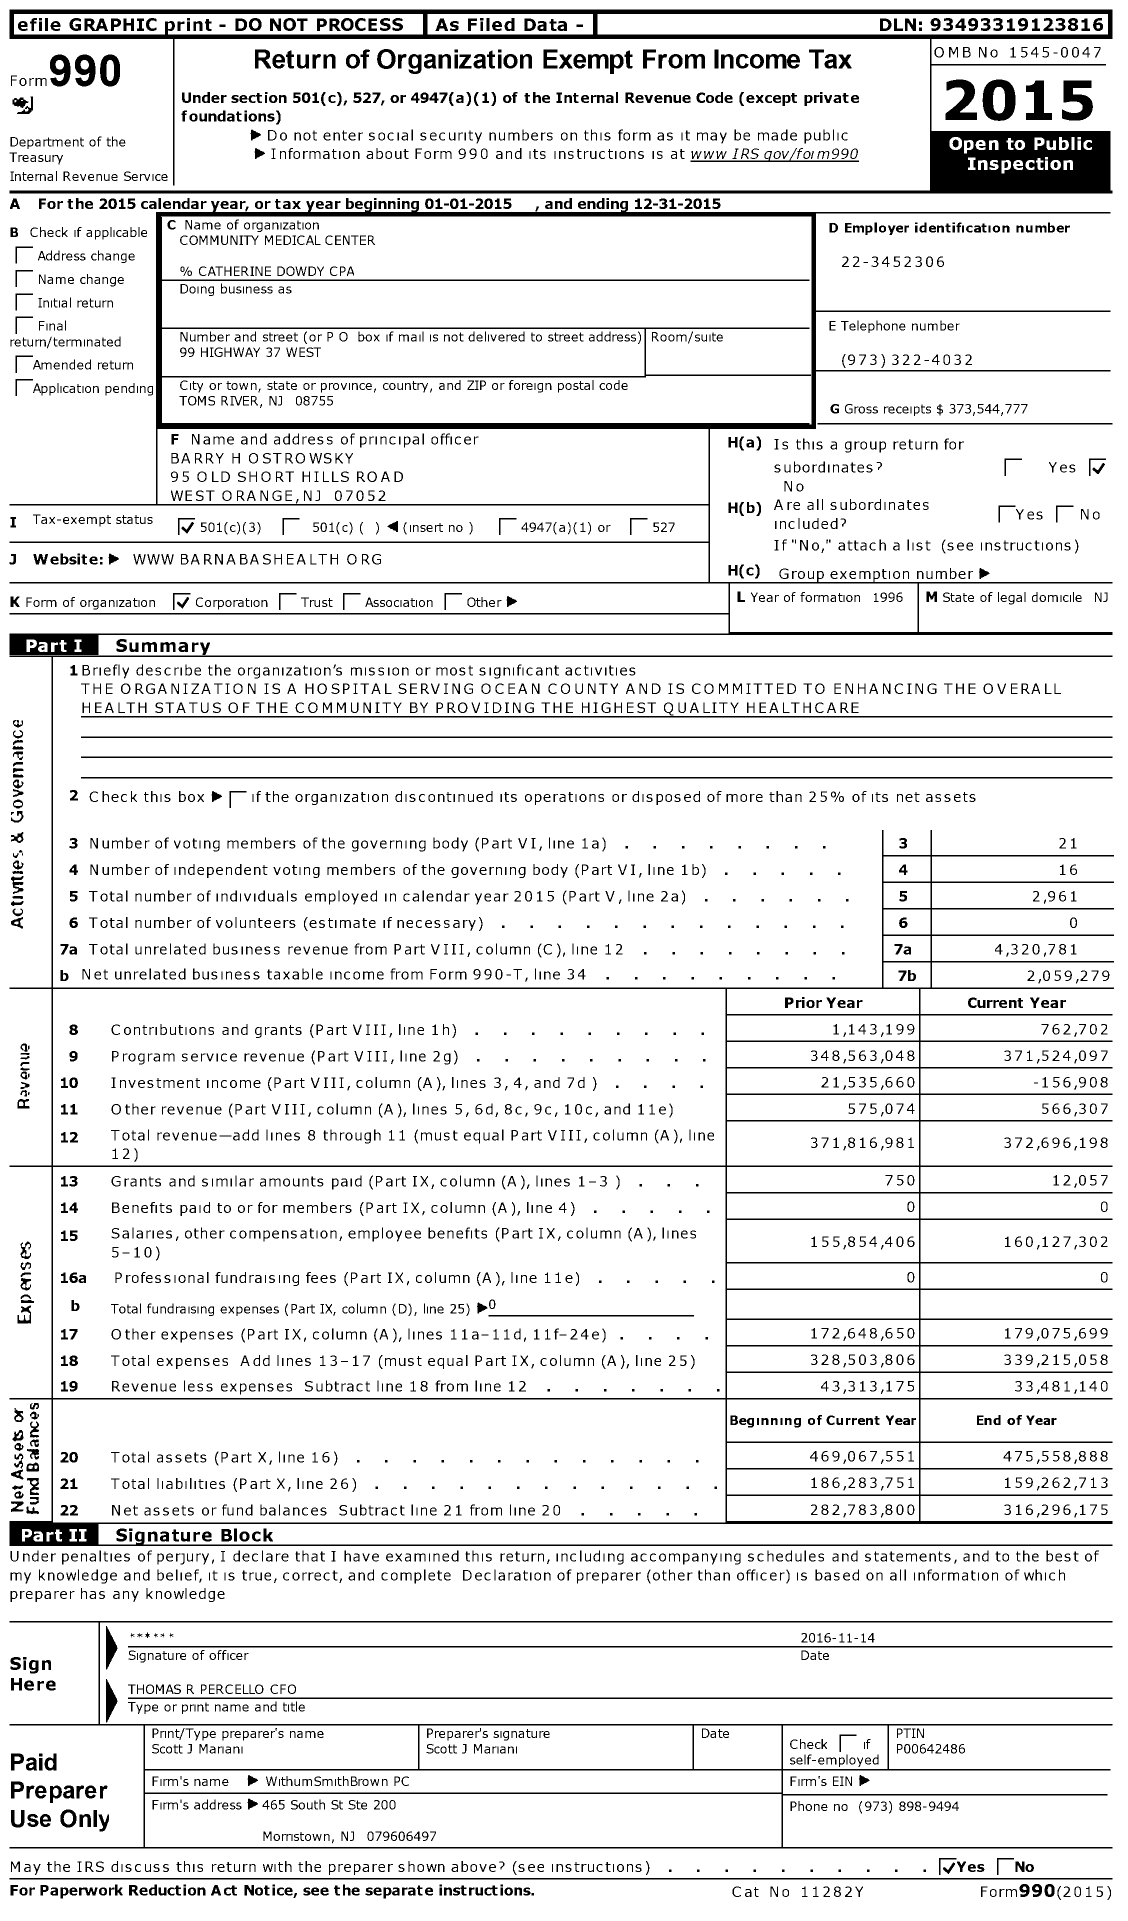 Image of first page of 2015 Form 990 for Community Medical Center (CMC)